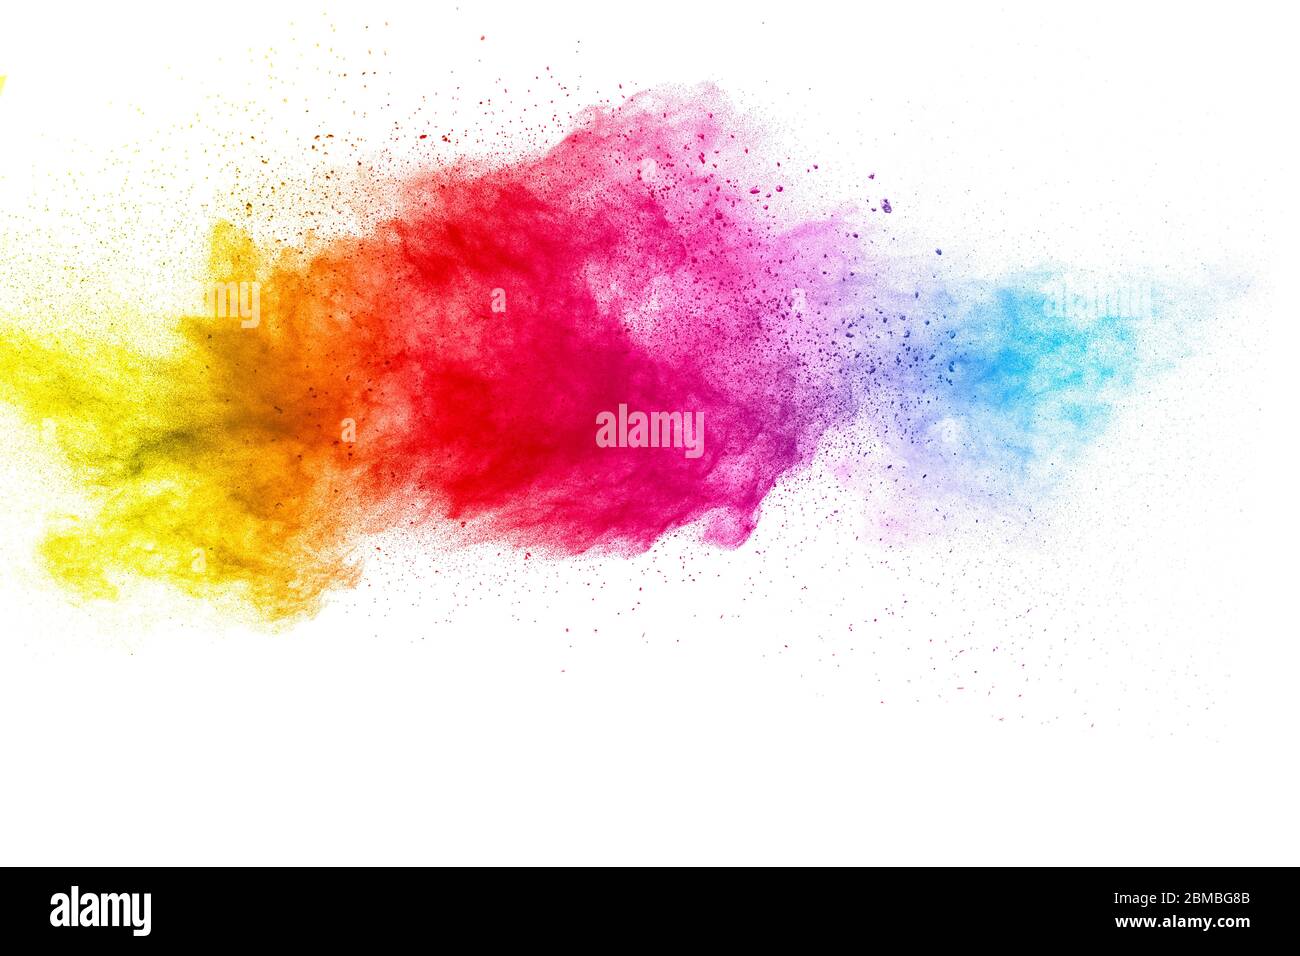 Multicolored particles explosion on white background. Colorful dust splatter. Stock Photo